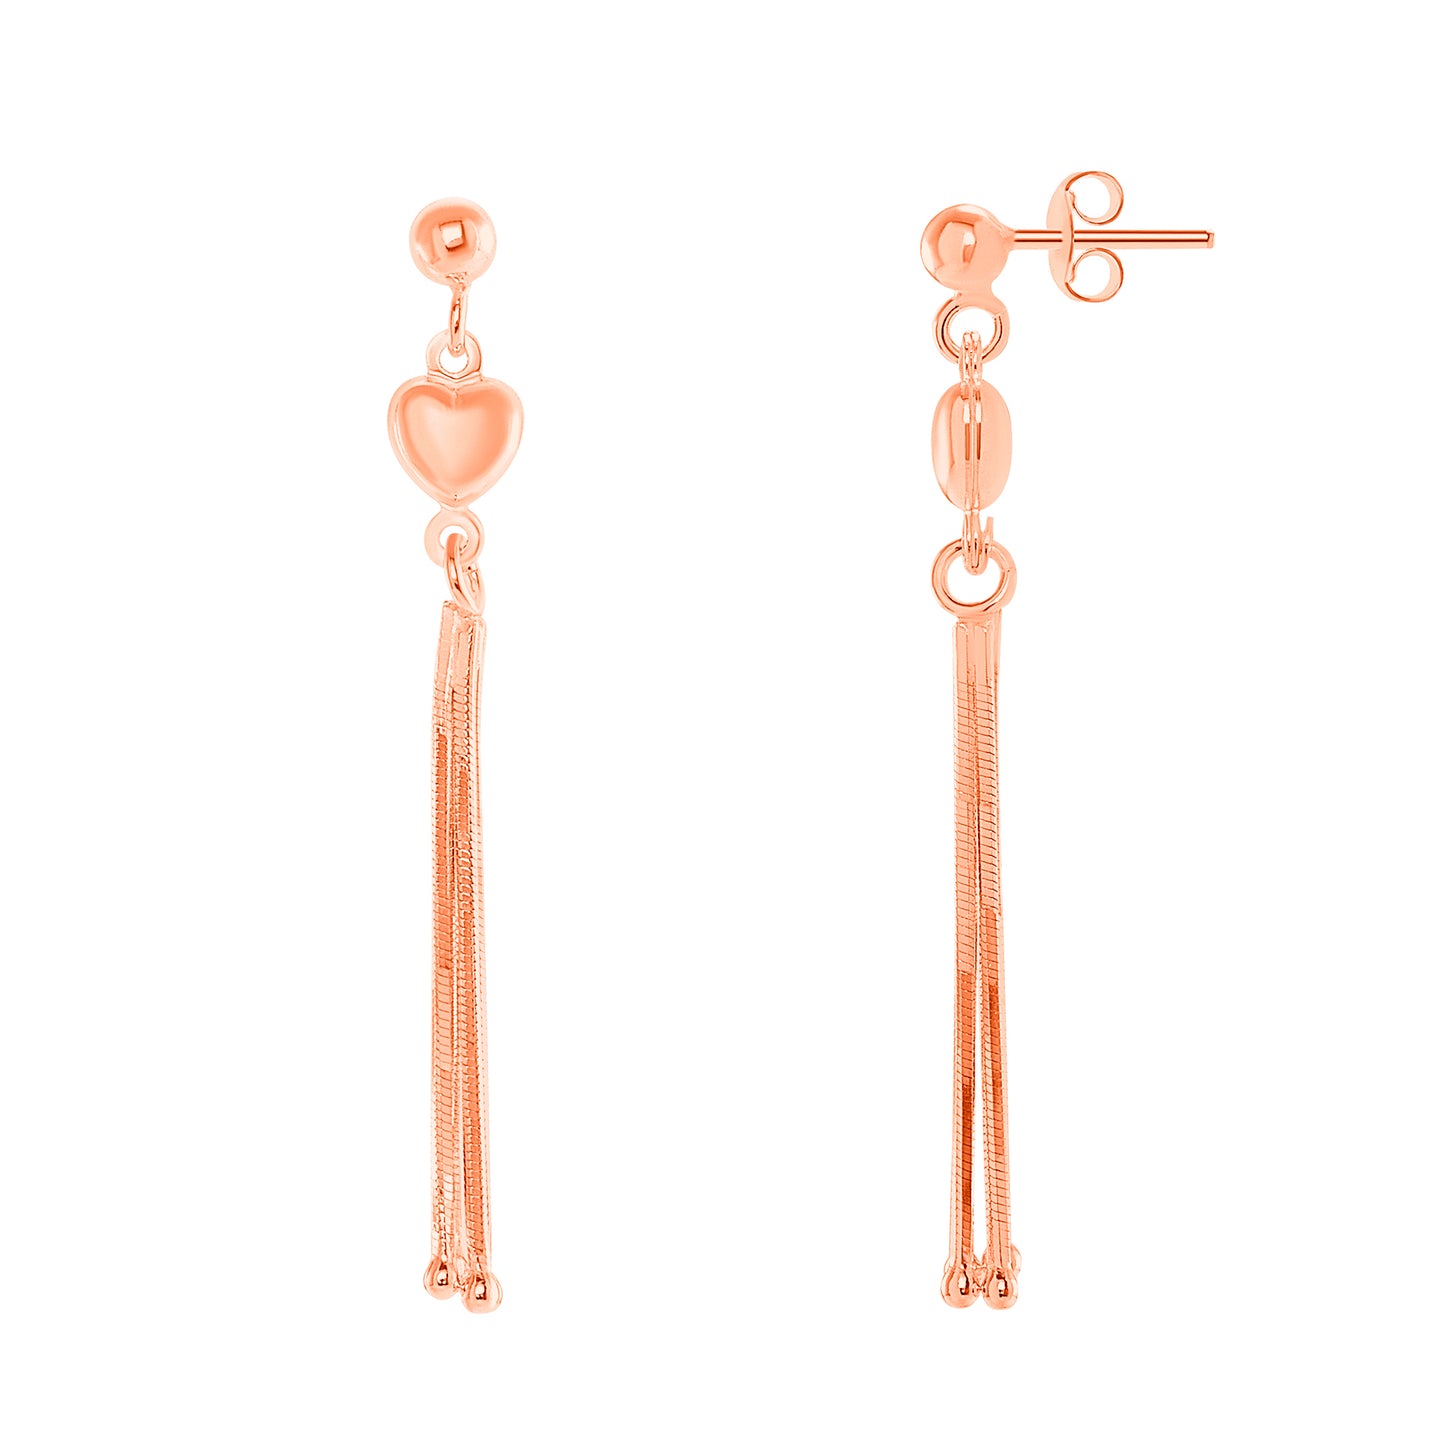 Silver 925 Rose Gold Plated Long Earring 3 Lines. ITE205-RG